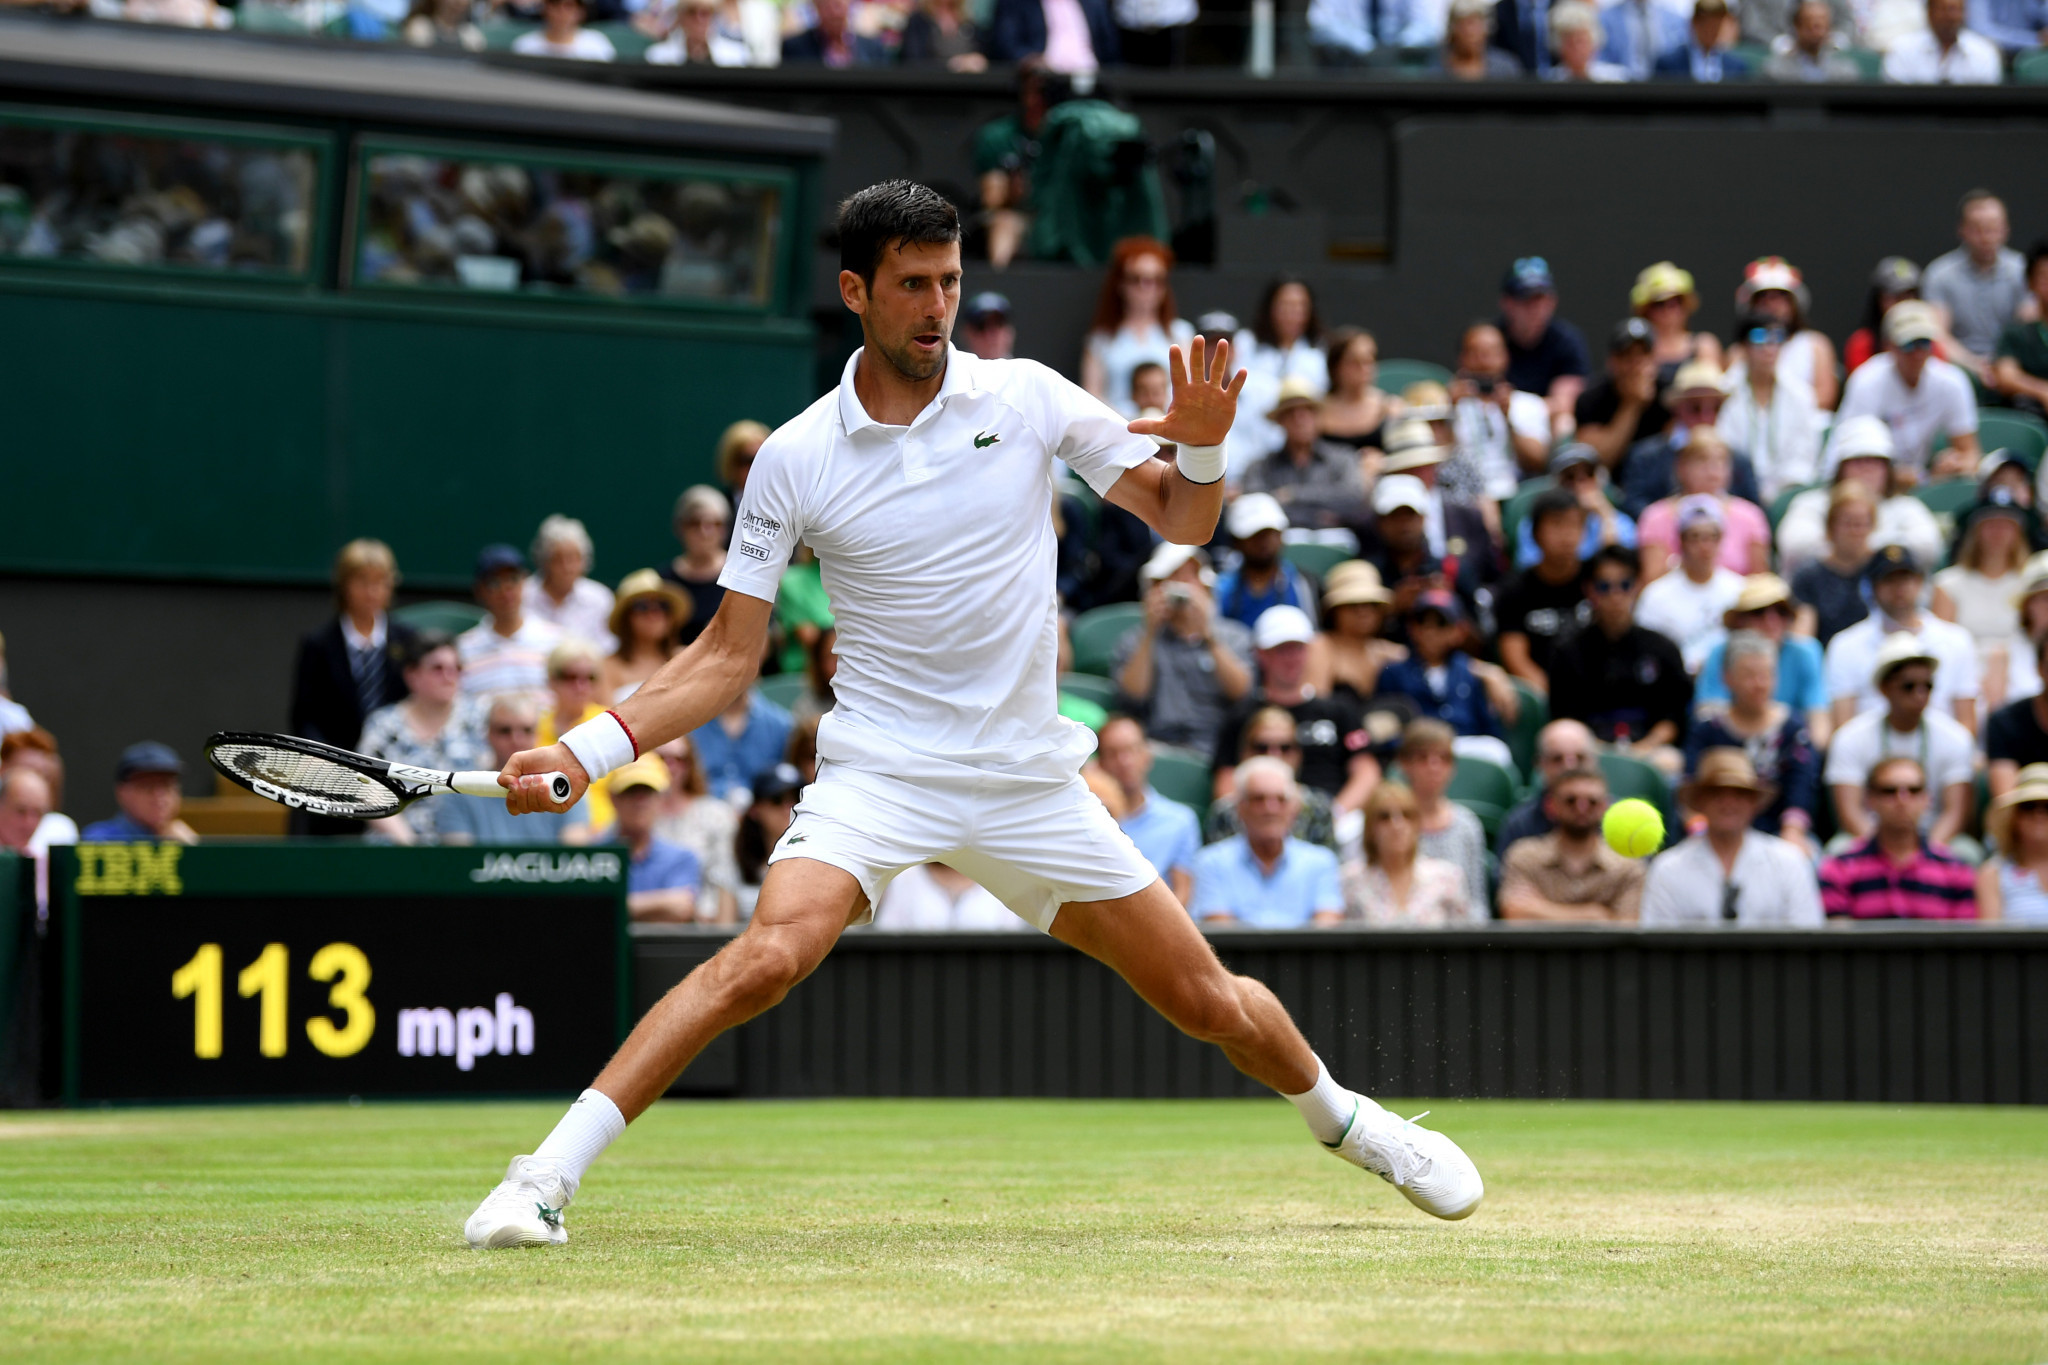 But Djokovic stormed back to triumph 6-4, 6-0, 6-2 ©Getty Images